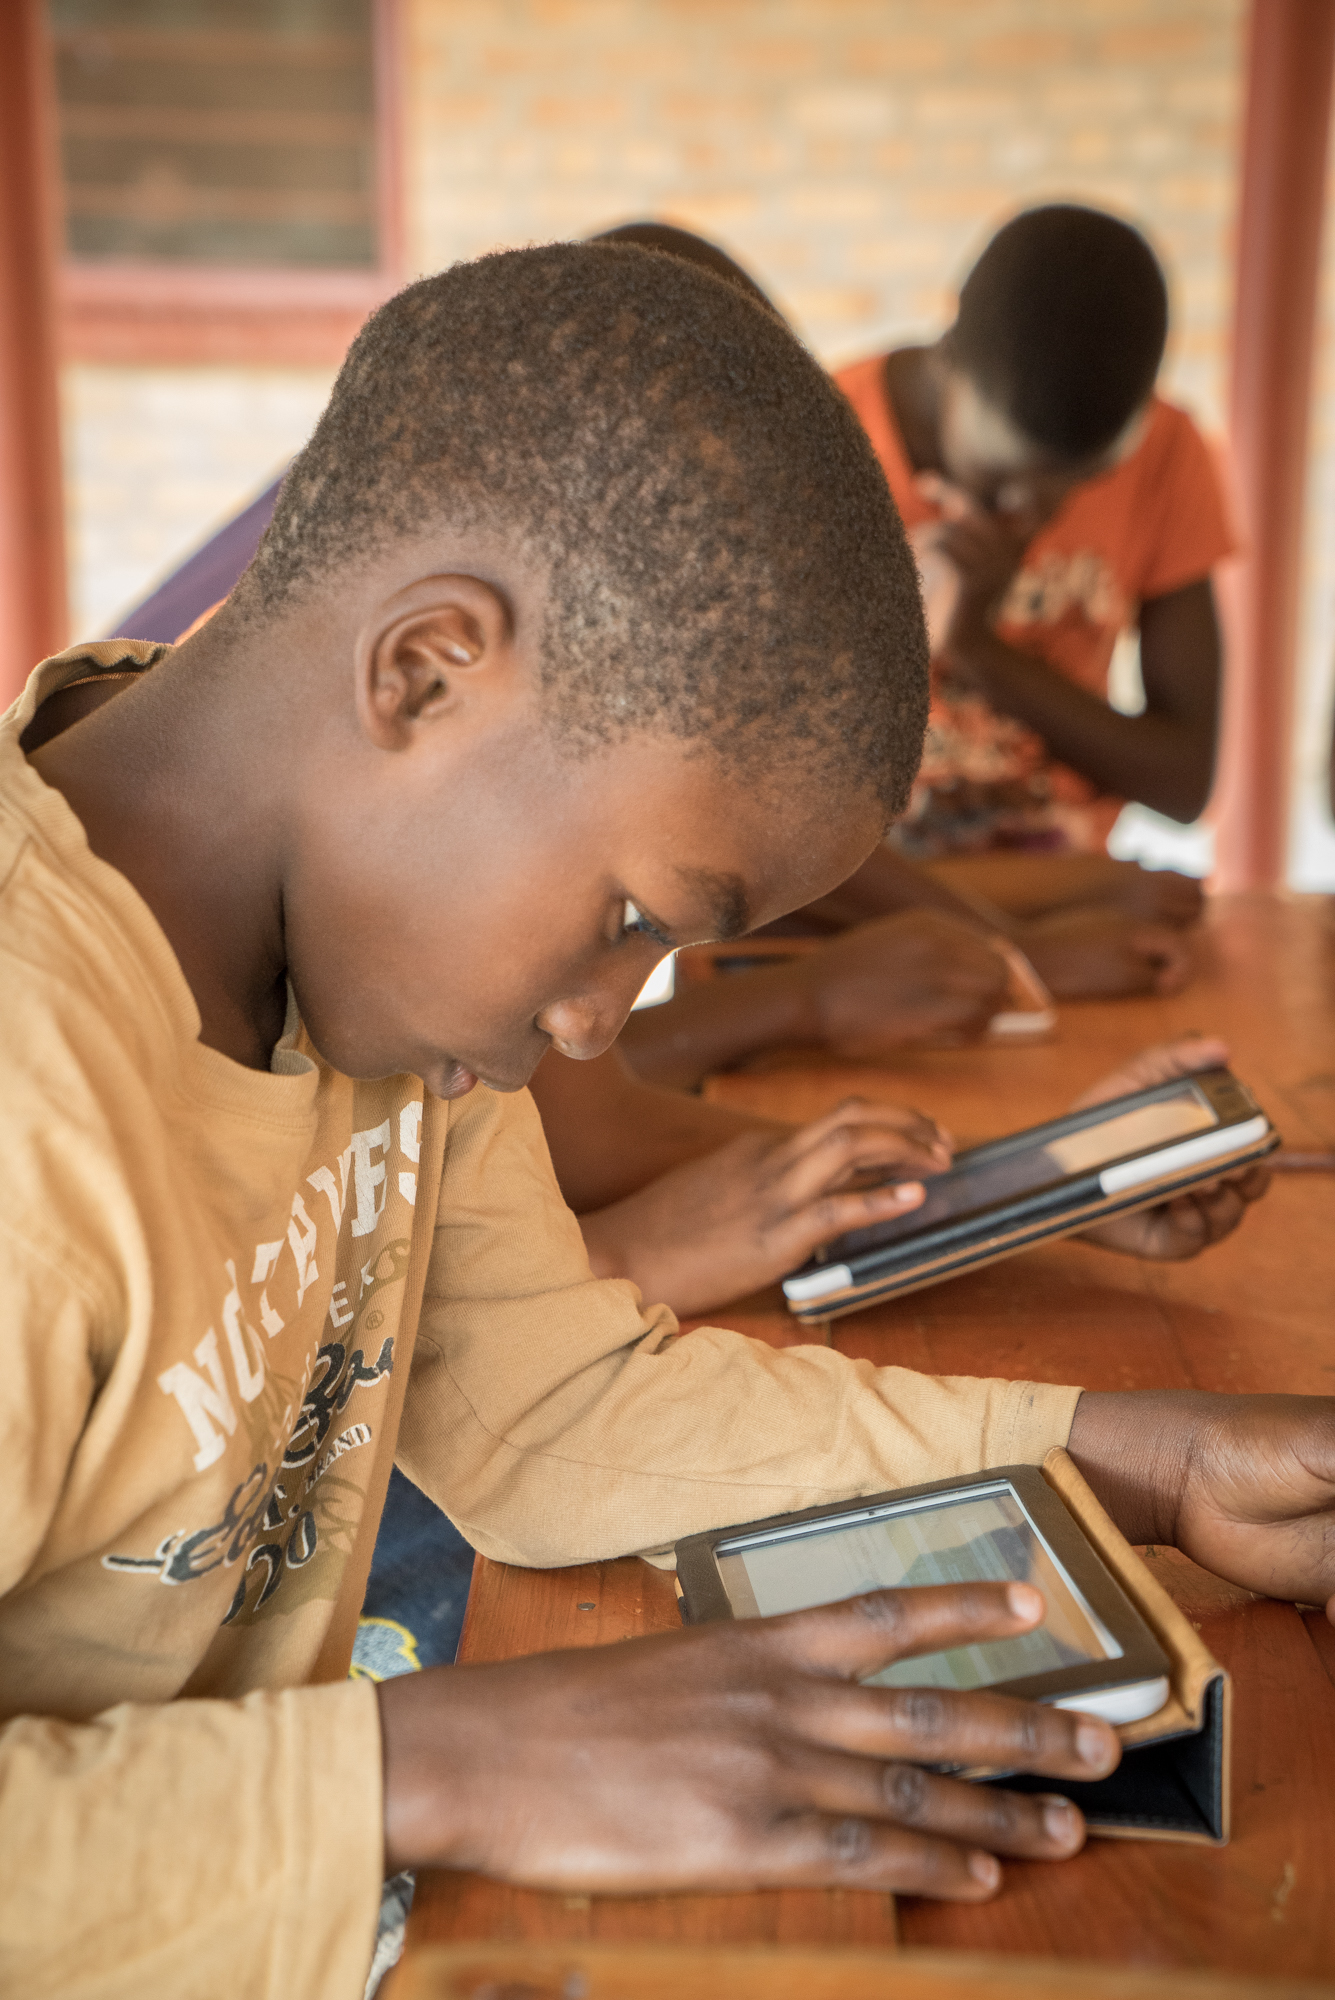 Prosper, 11years old, interacting with KA Lite on a tablet, in Zambia.